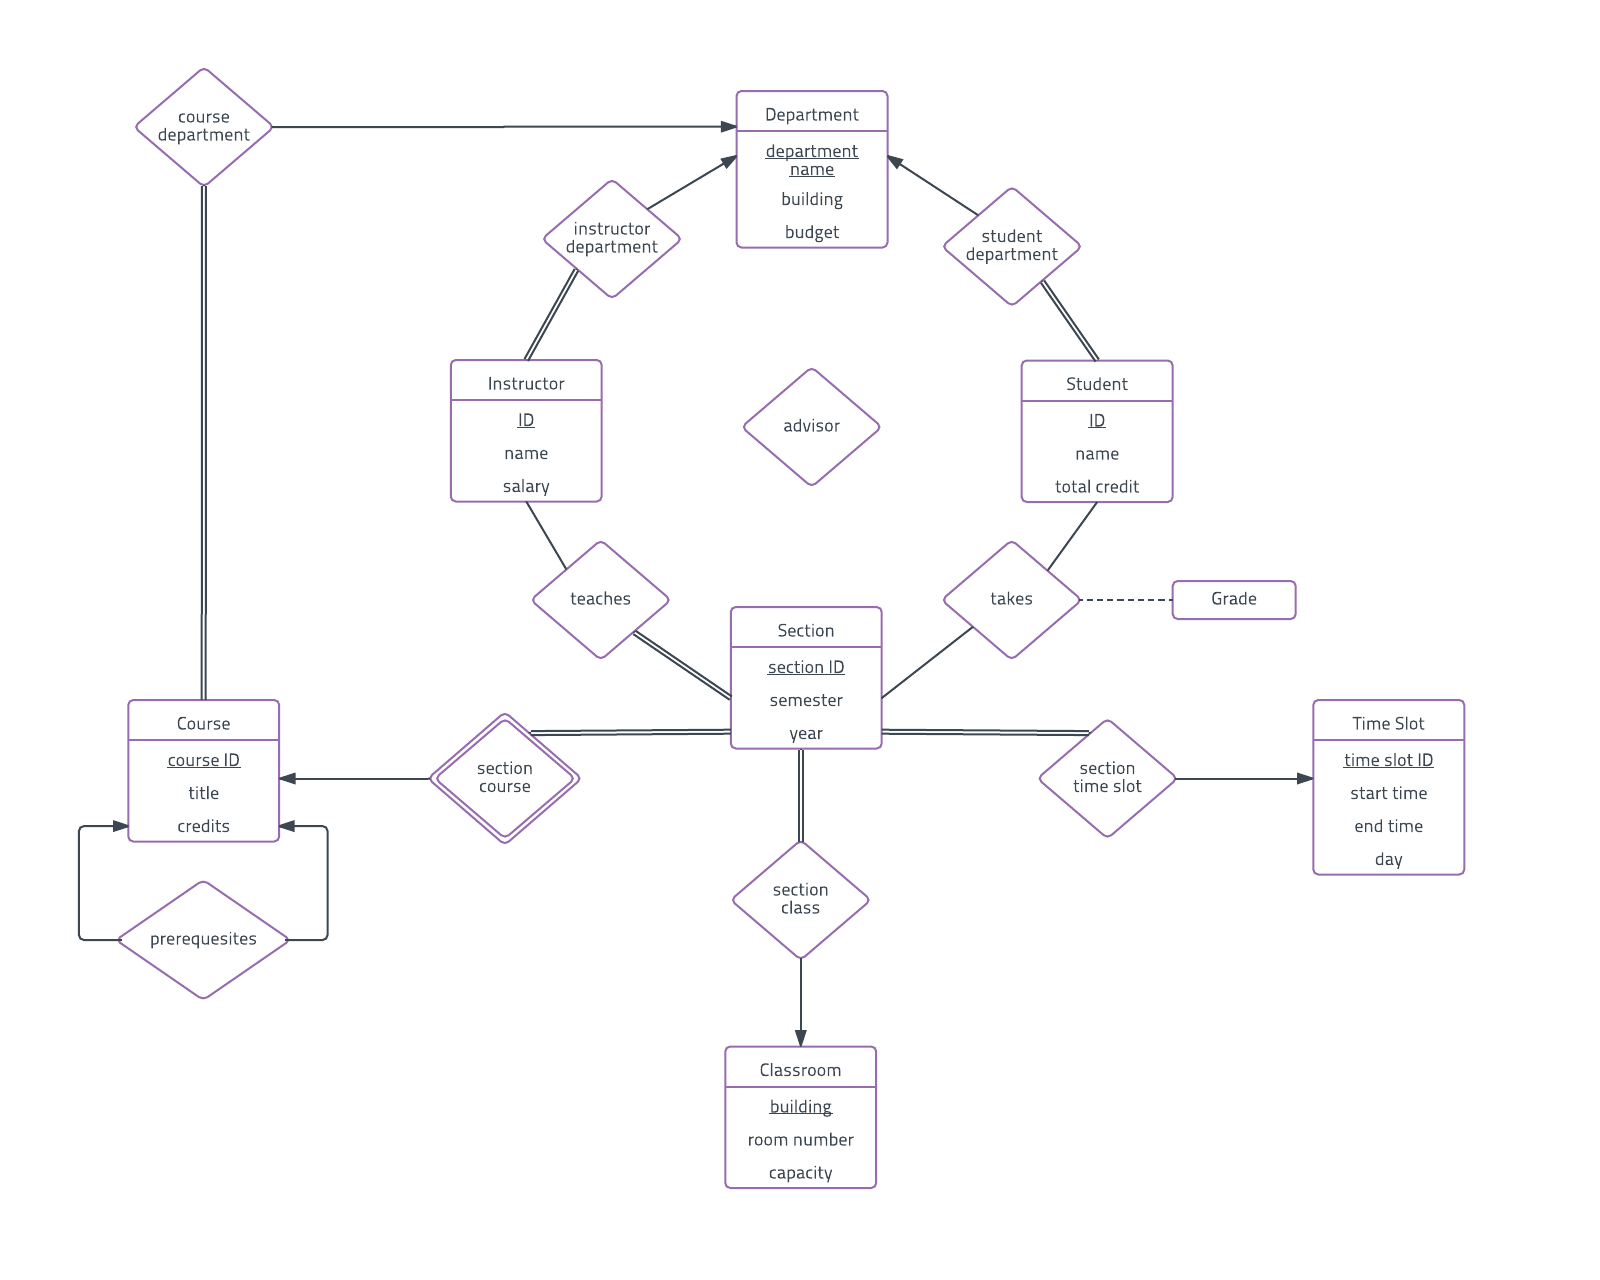 Er Diagram Examples And Templates | Lucidchart regarding Er Diagram Examples With Solutions Ppt